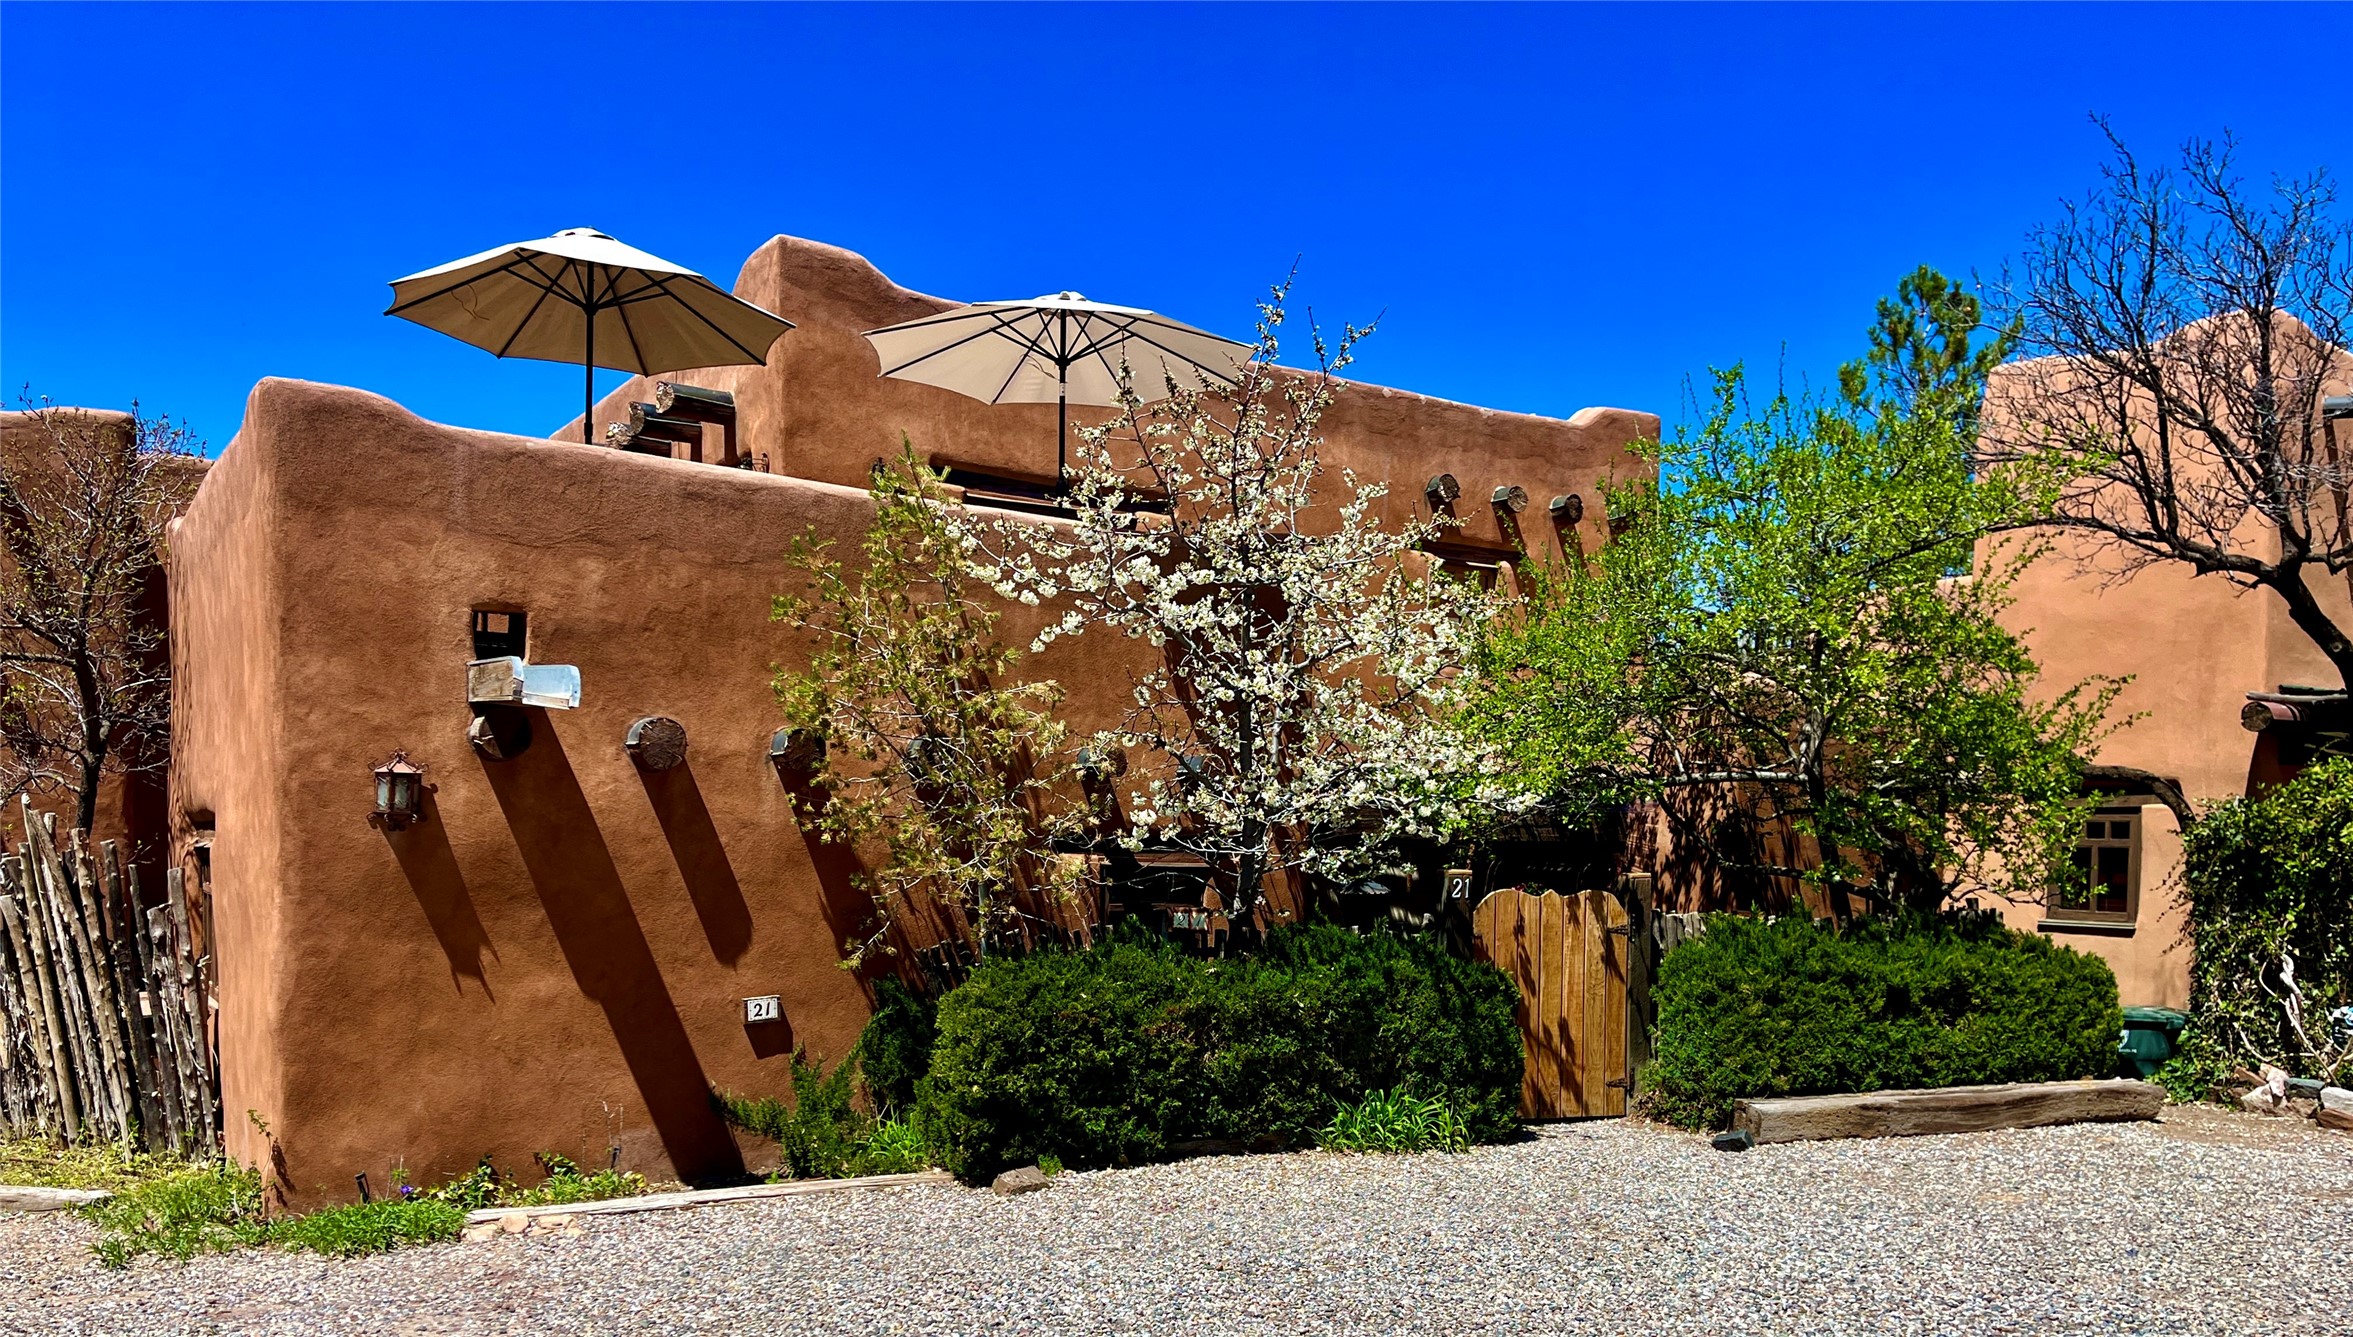 815 E Palace Avenue 21, Santa Fe, New Mexico 87501, 2 Bedrooms Bedrooms, ,2 BathroomsBathrooms,Residential,For Sale,815 E Palace Avenue 21,202400431